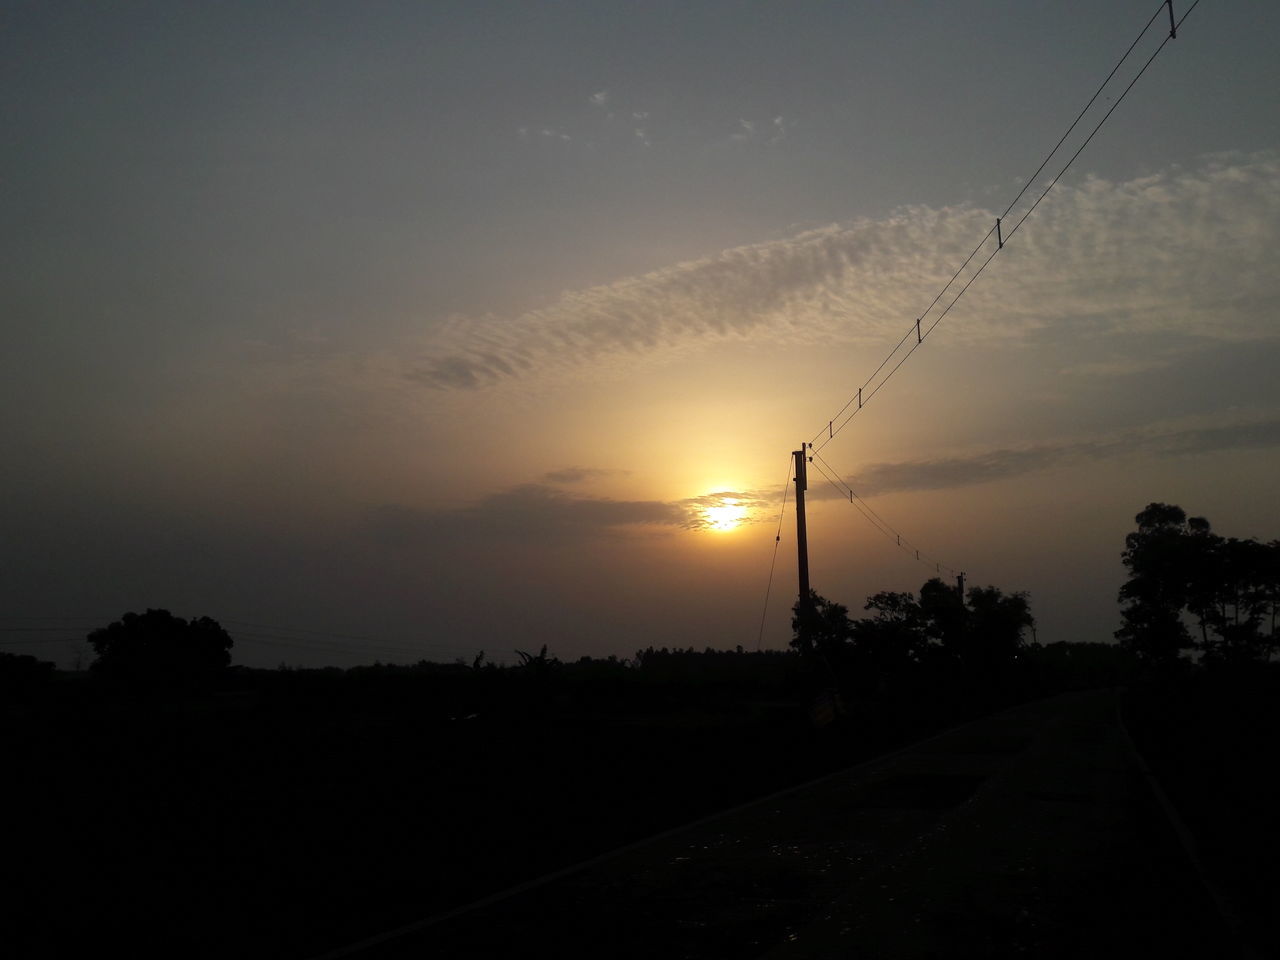 sky, sunset, nature, silhouette, cloud, dawn, transportation, road, tree, beauty in nature, horizon, no people, environment, electricity, scenics - nature, technology, sun, tranquility, landscape, cable, plant, evening, outdoors, light, tranquil scene, street, sunlight, afterglow, electricity pylon, darkness, orange color, land, city